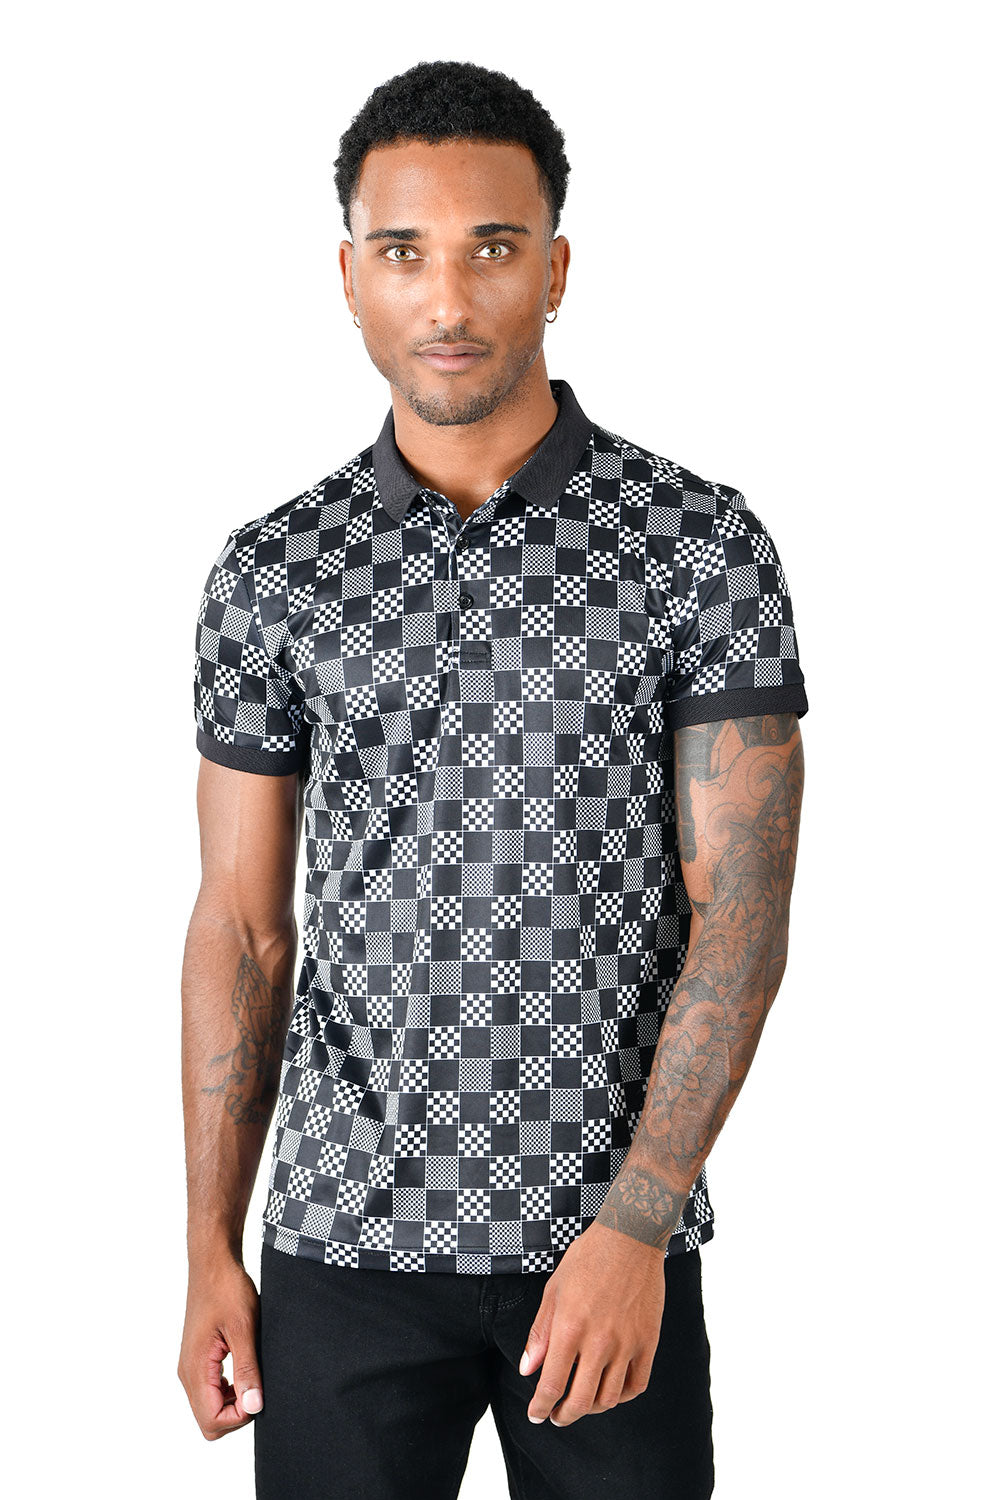 Pin by A.kash on Jerseys  Designer clothes for men, Louis vuitton shirts,  Polo shirt outfits